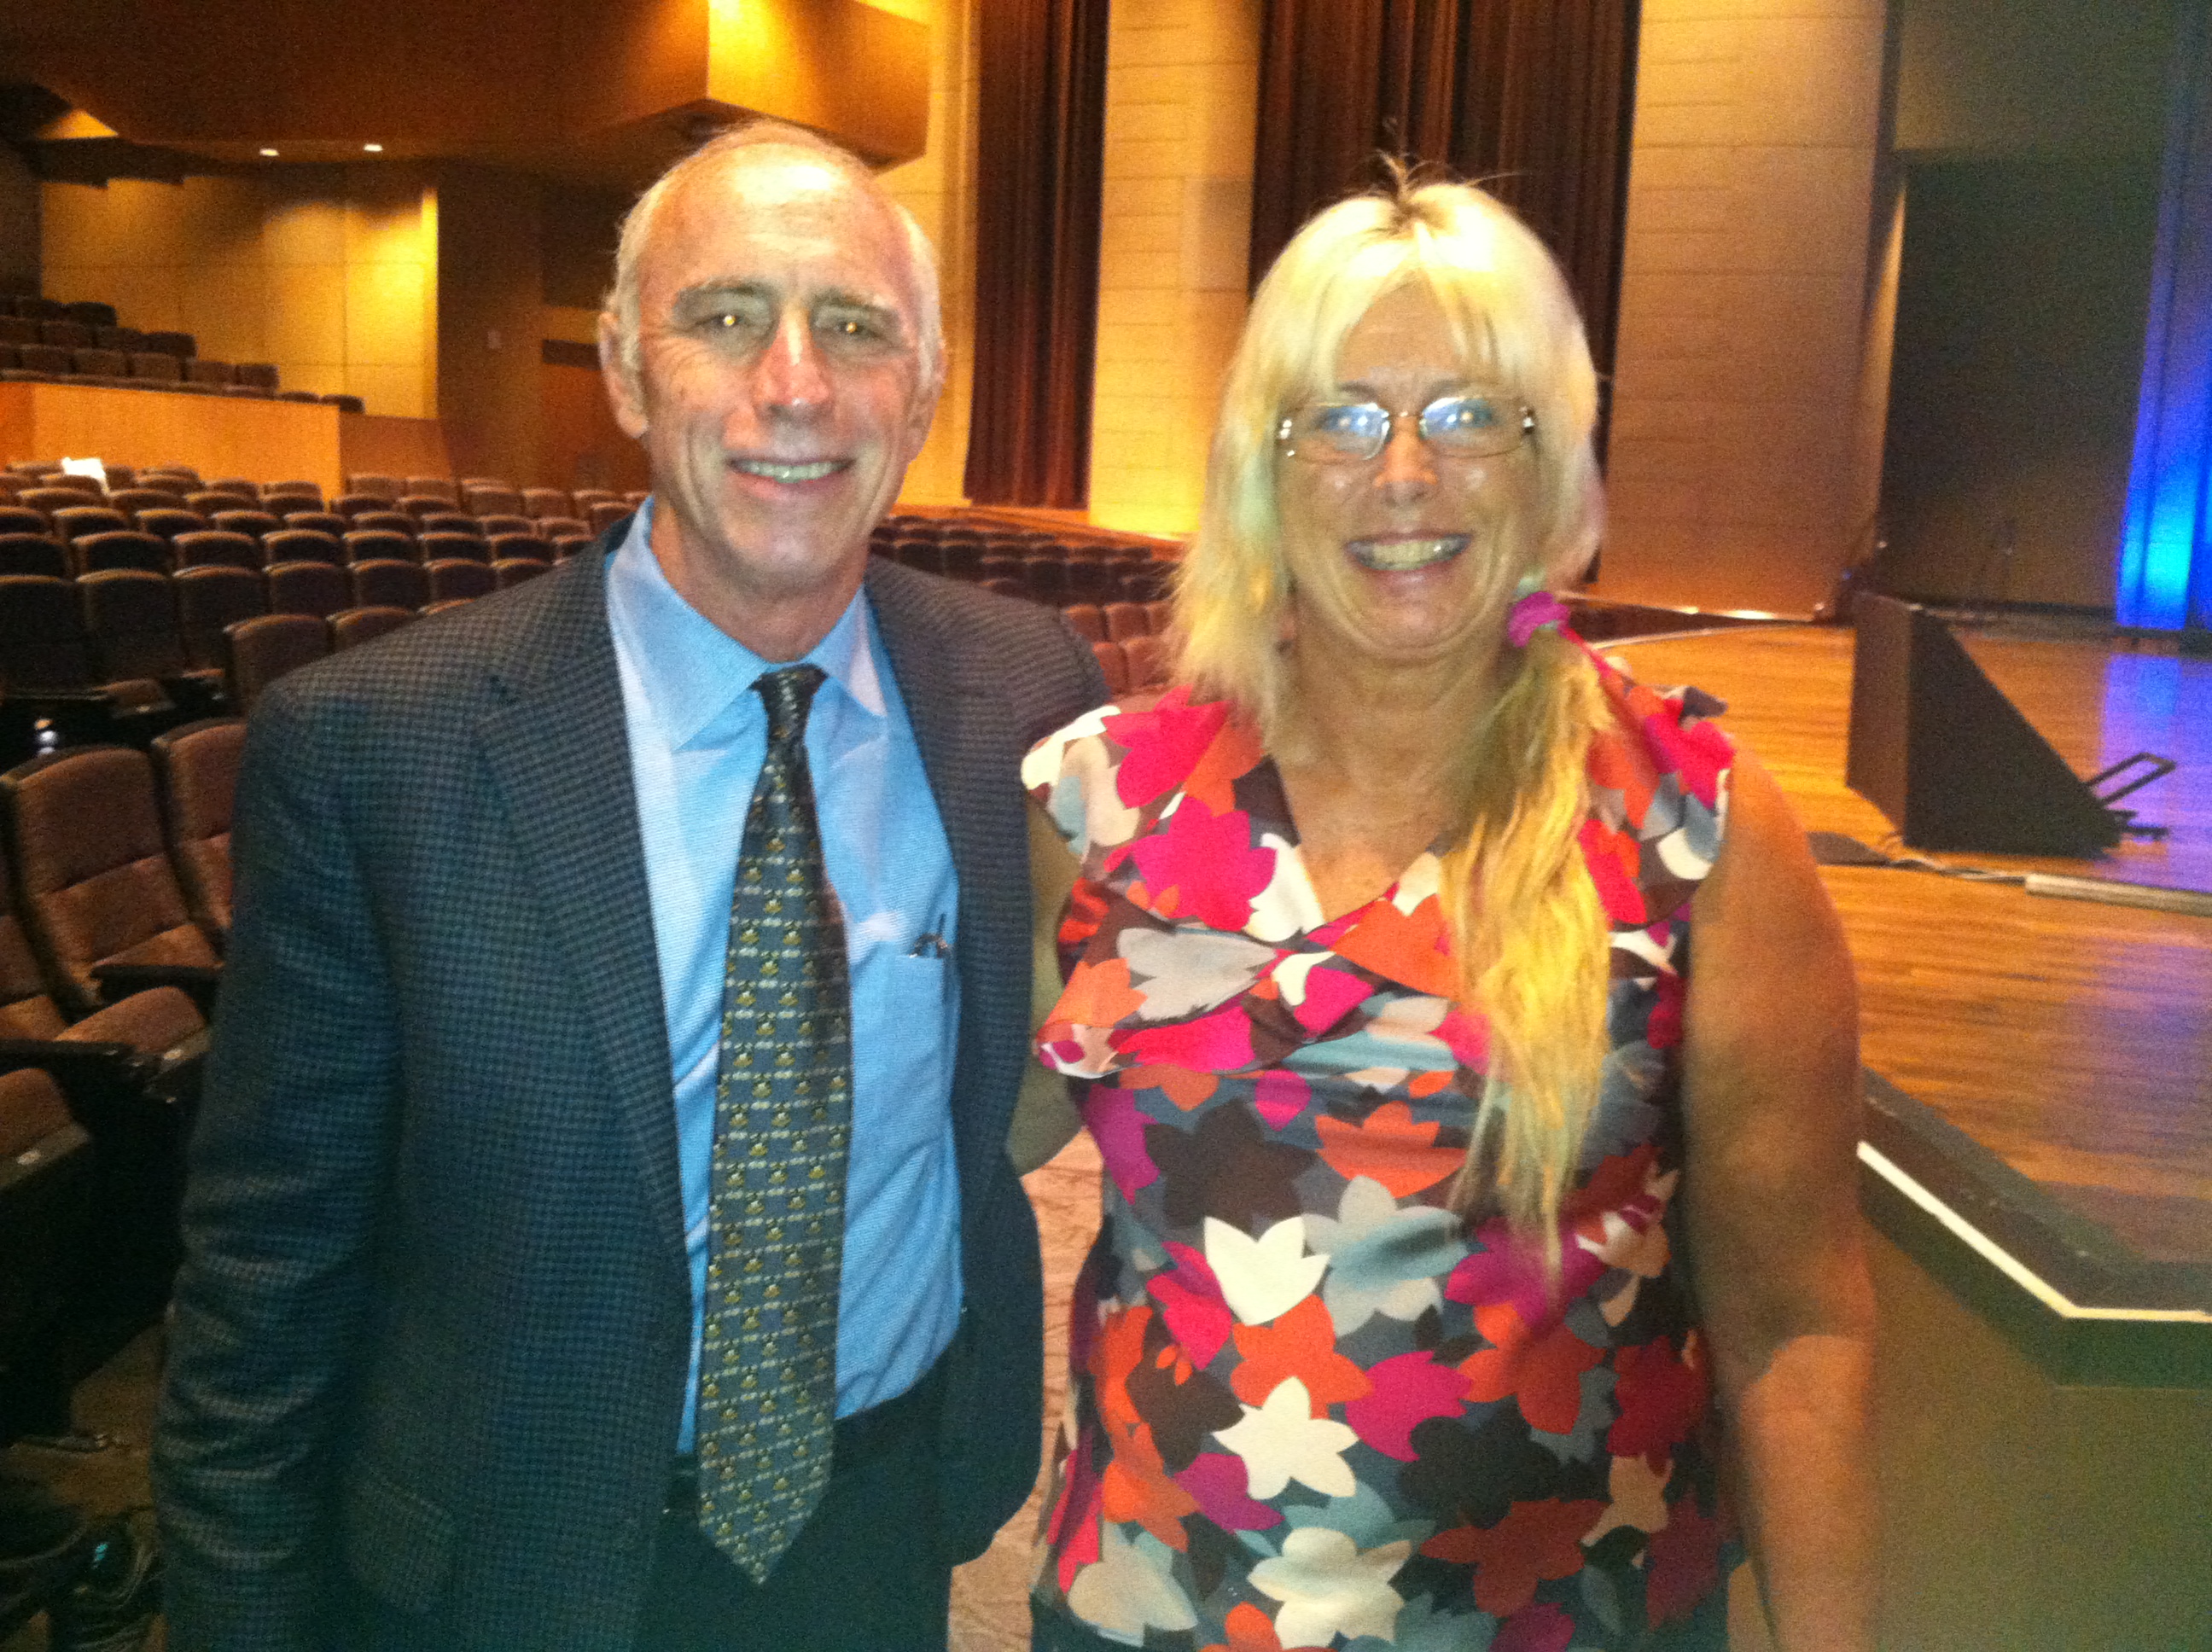 Shell and Paul Pockros M.D. on location for Curing HEP-C in 2015 at the International Liver Symposium